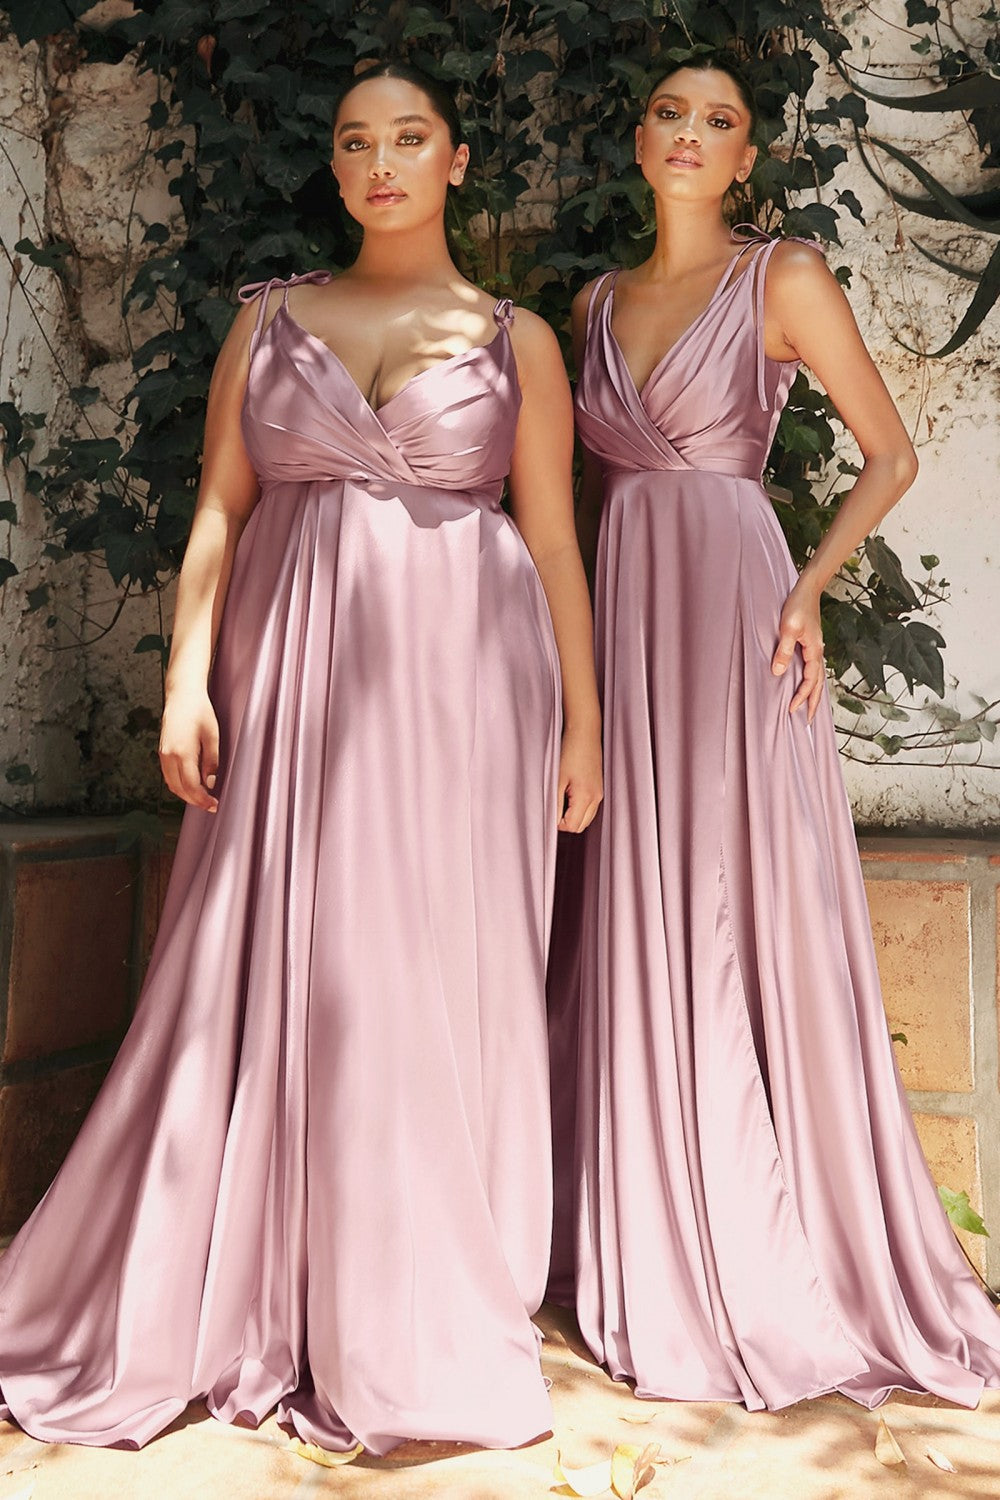 Flowy Satin Prom Gown A-Line Skirt with High Leg Slit Fitted on Waist Bodice Vintage Neckline with Tied Straps CDBD105 Elsy Style Bridesmaid